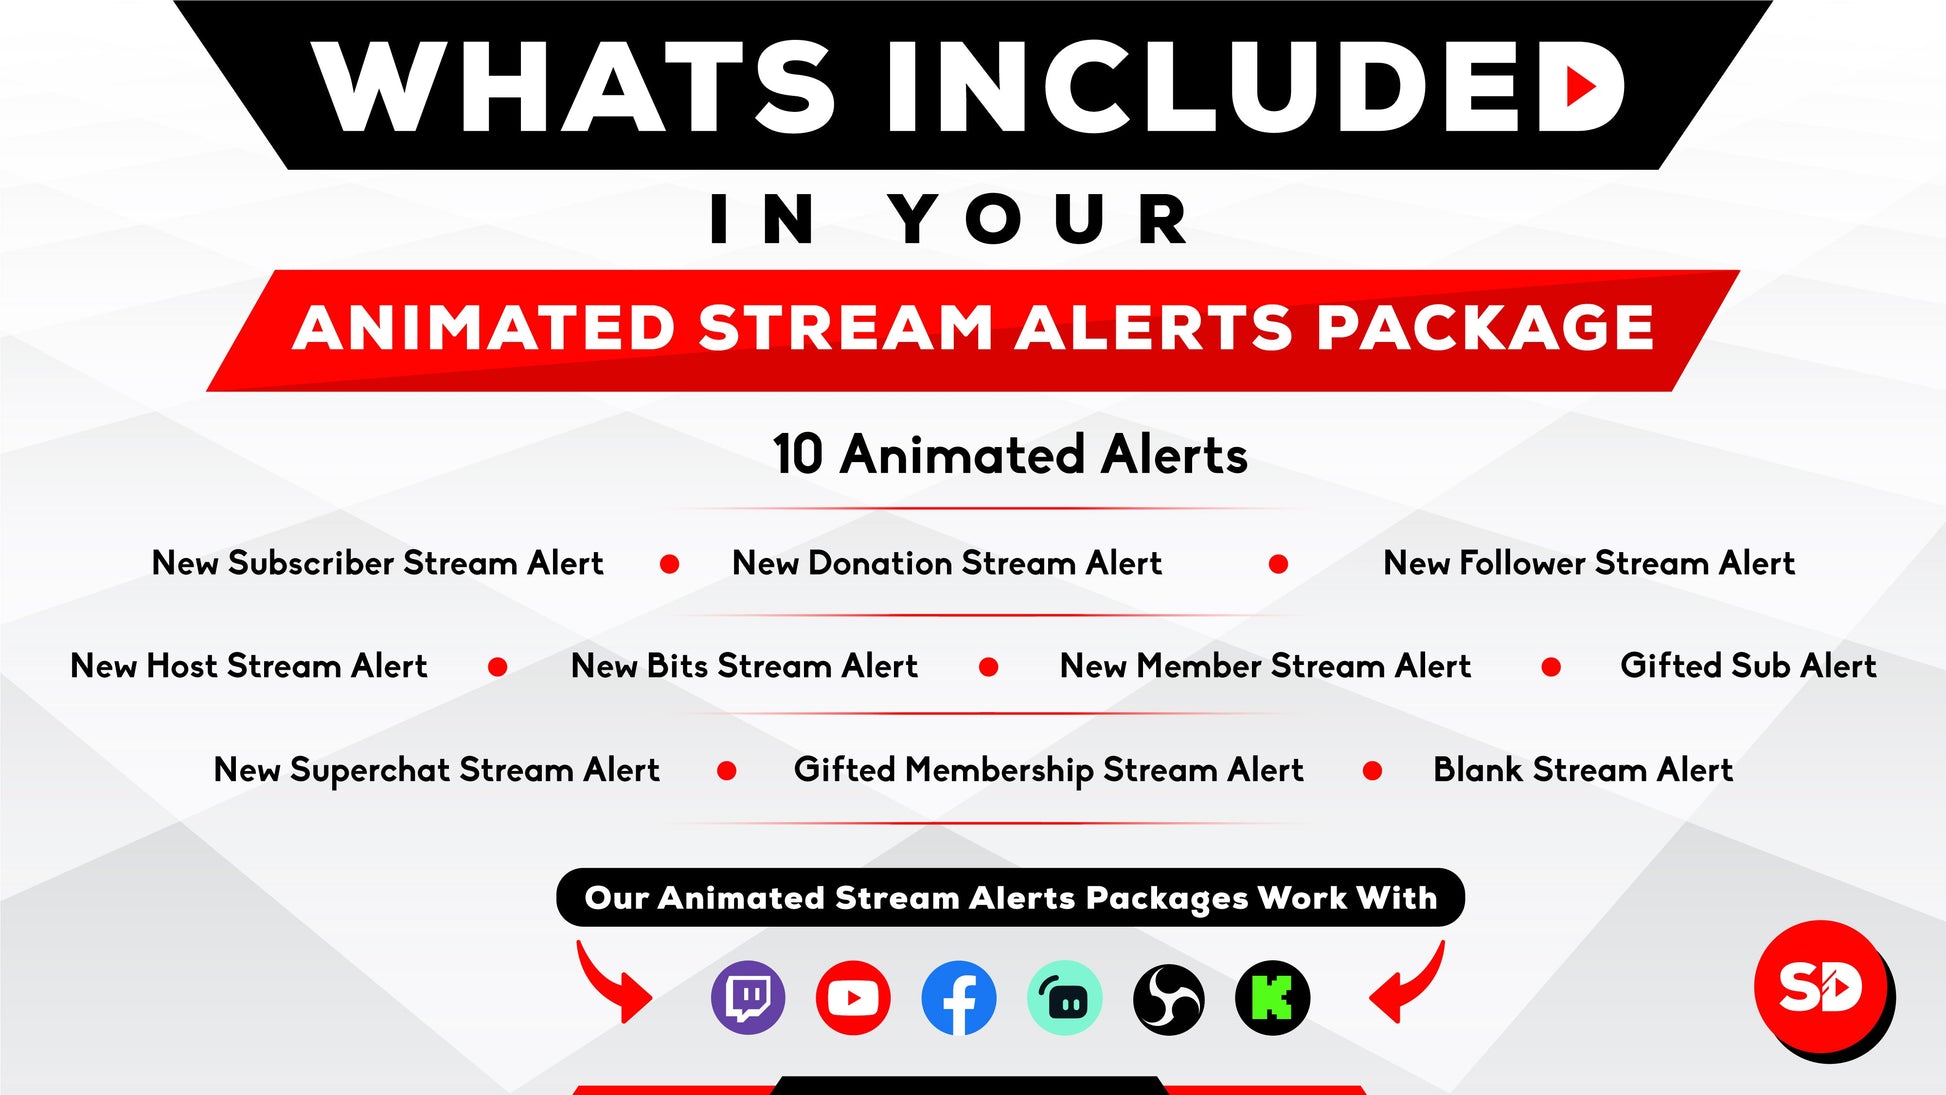 whats included in your package - animated alerts - akatsuki - stream designz